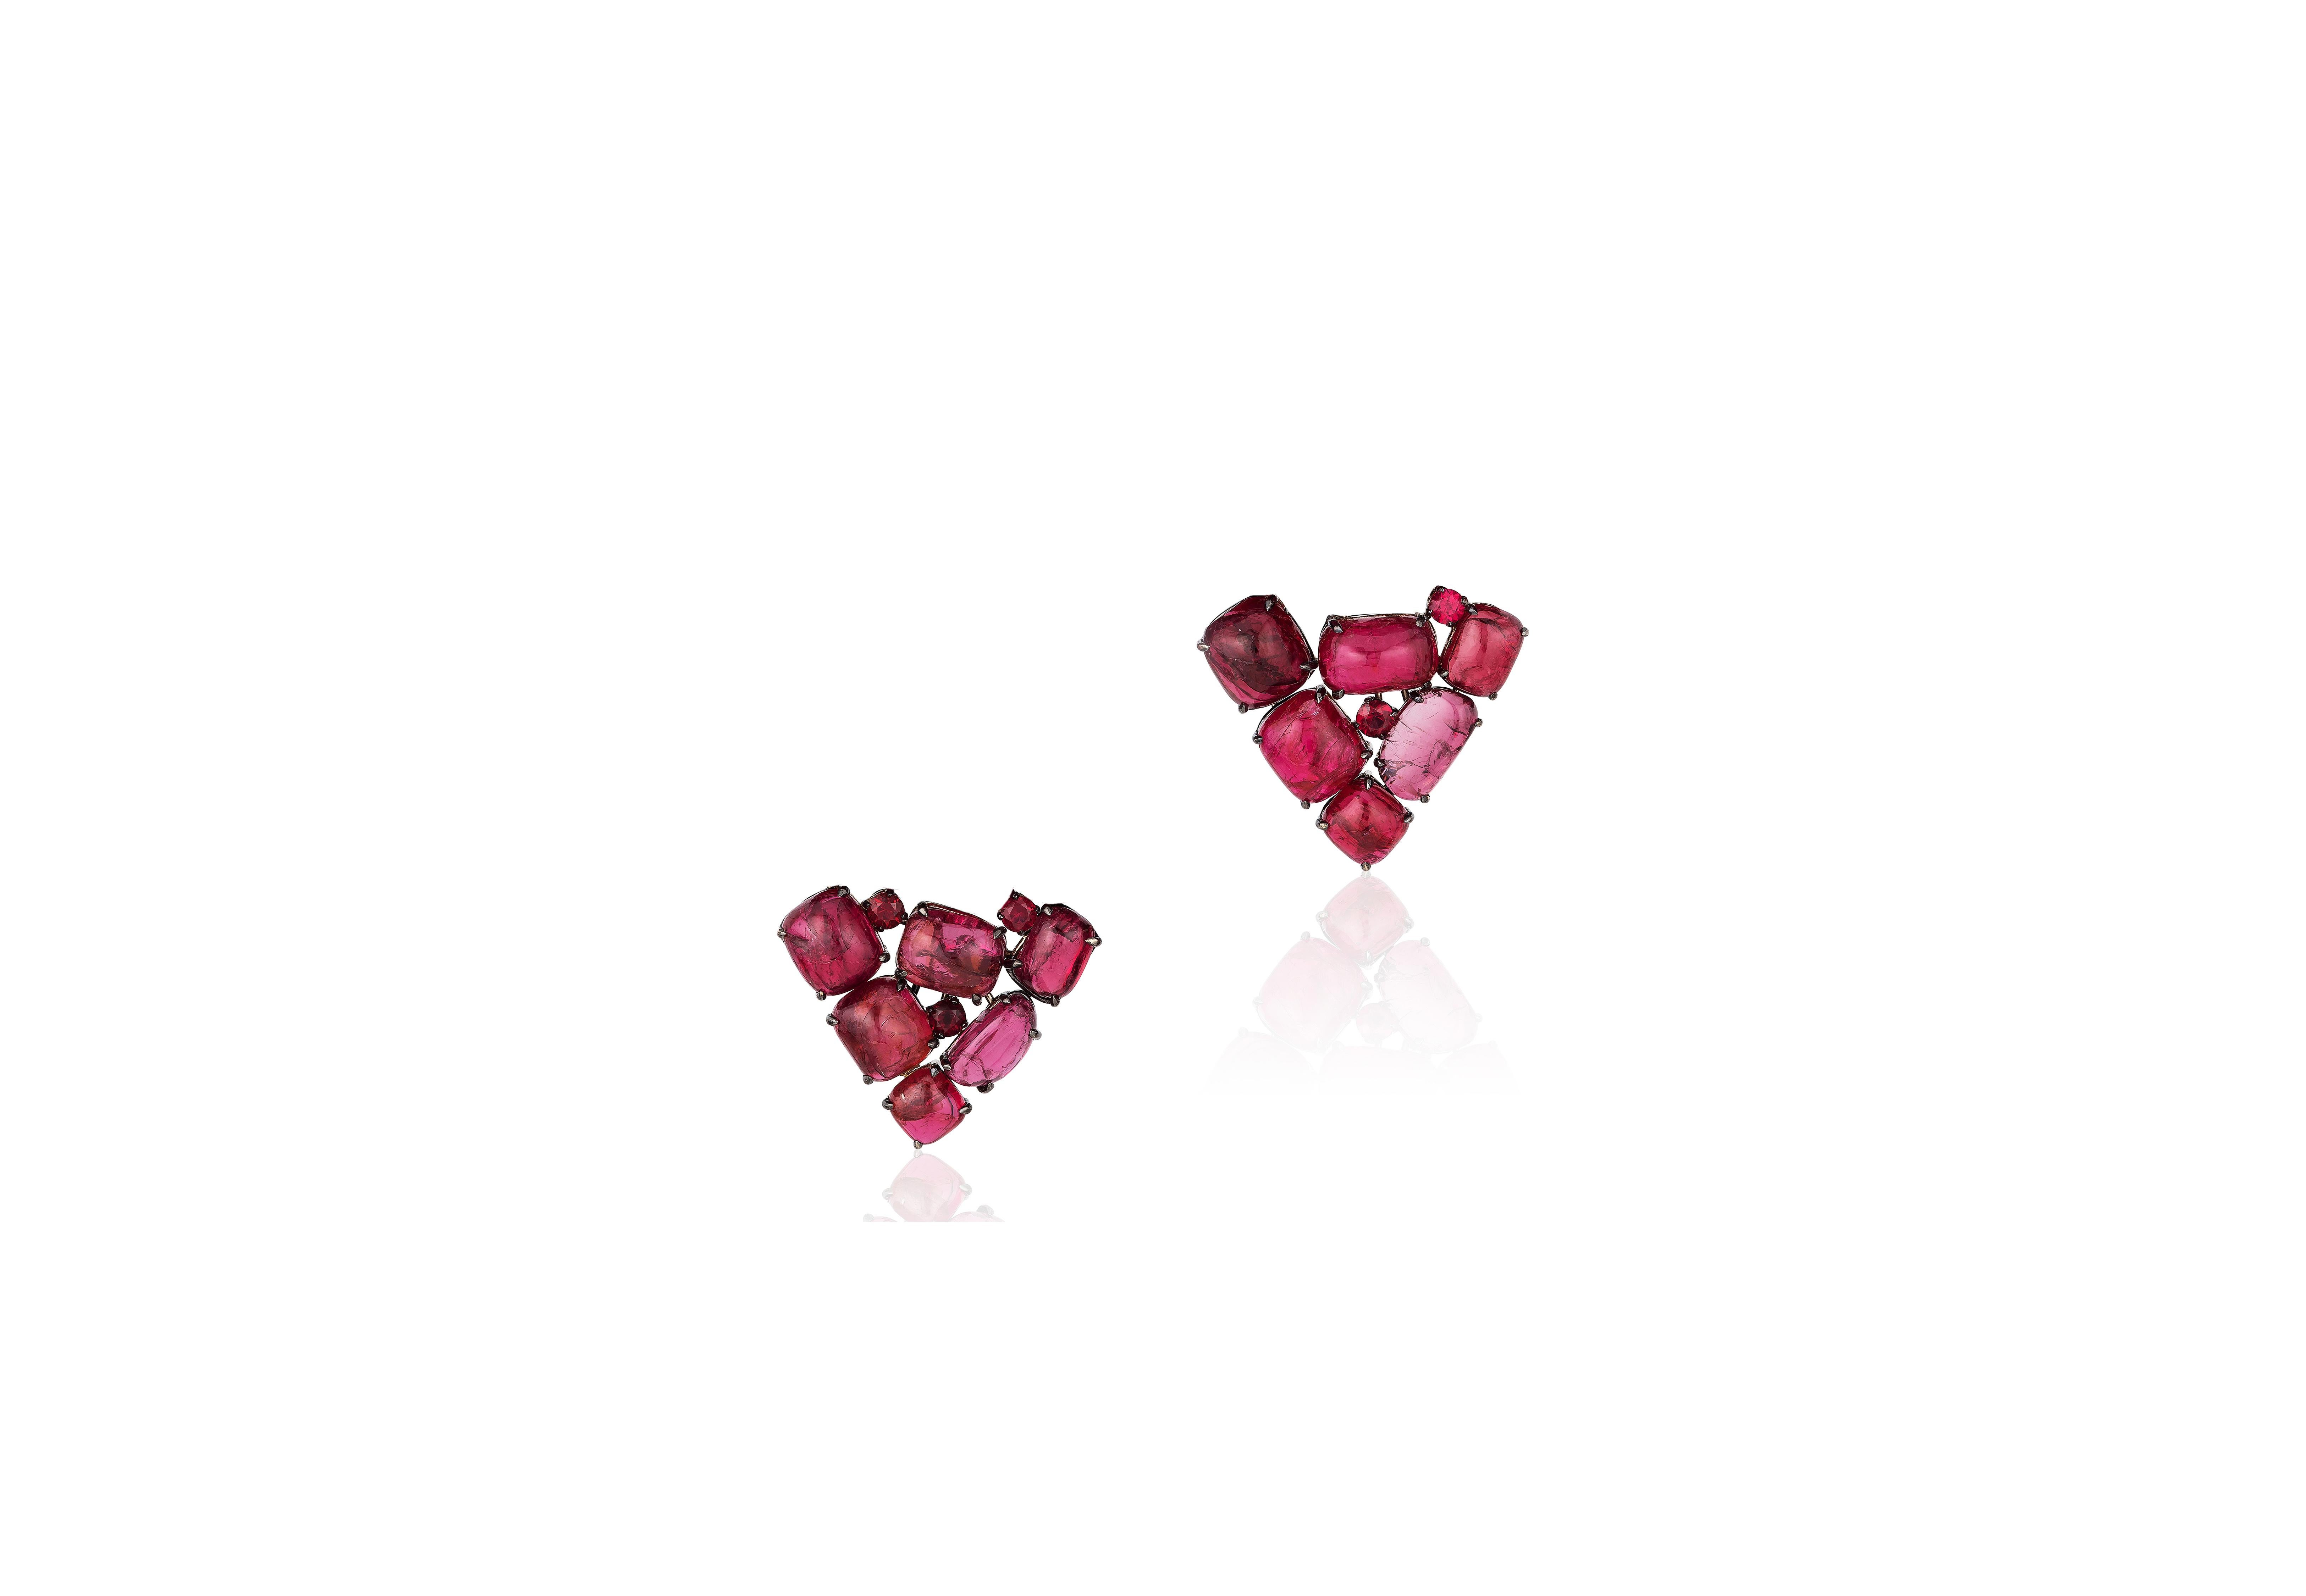 These Spinel Earrings in 18K White Gold from the 'G-One' Collection are a refined display of elegance. These earrings feature stunning spinel gemstones set in 18K white gold. The sophisticated design allows the deep hues of the spinel stones to